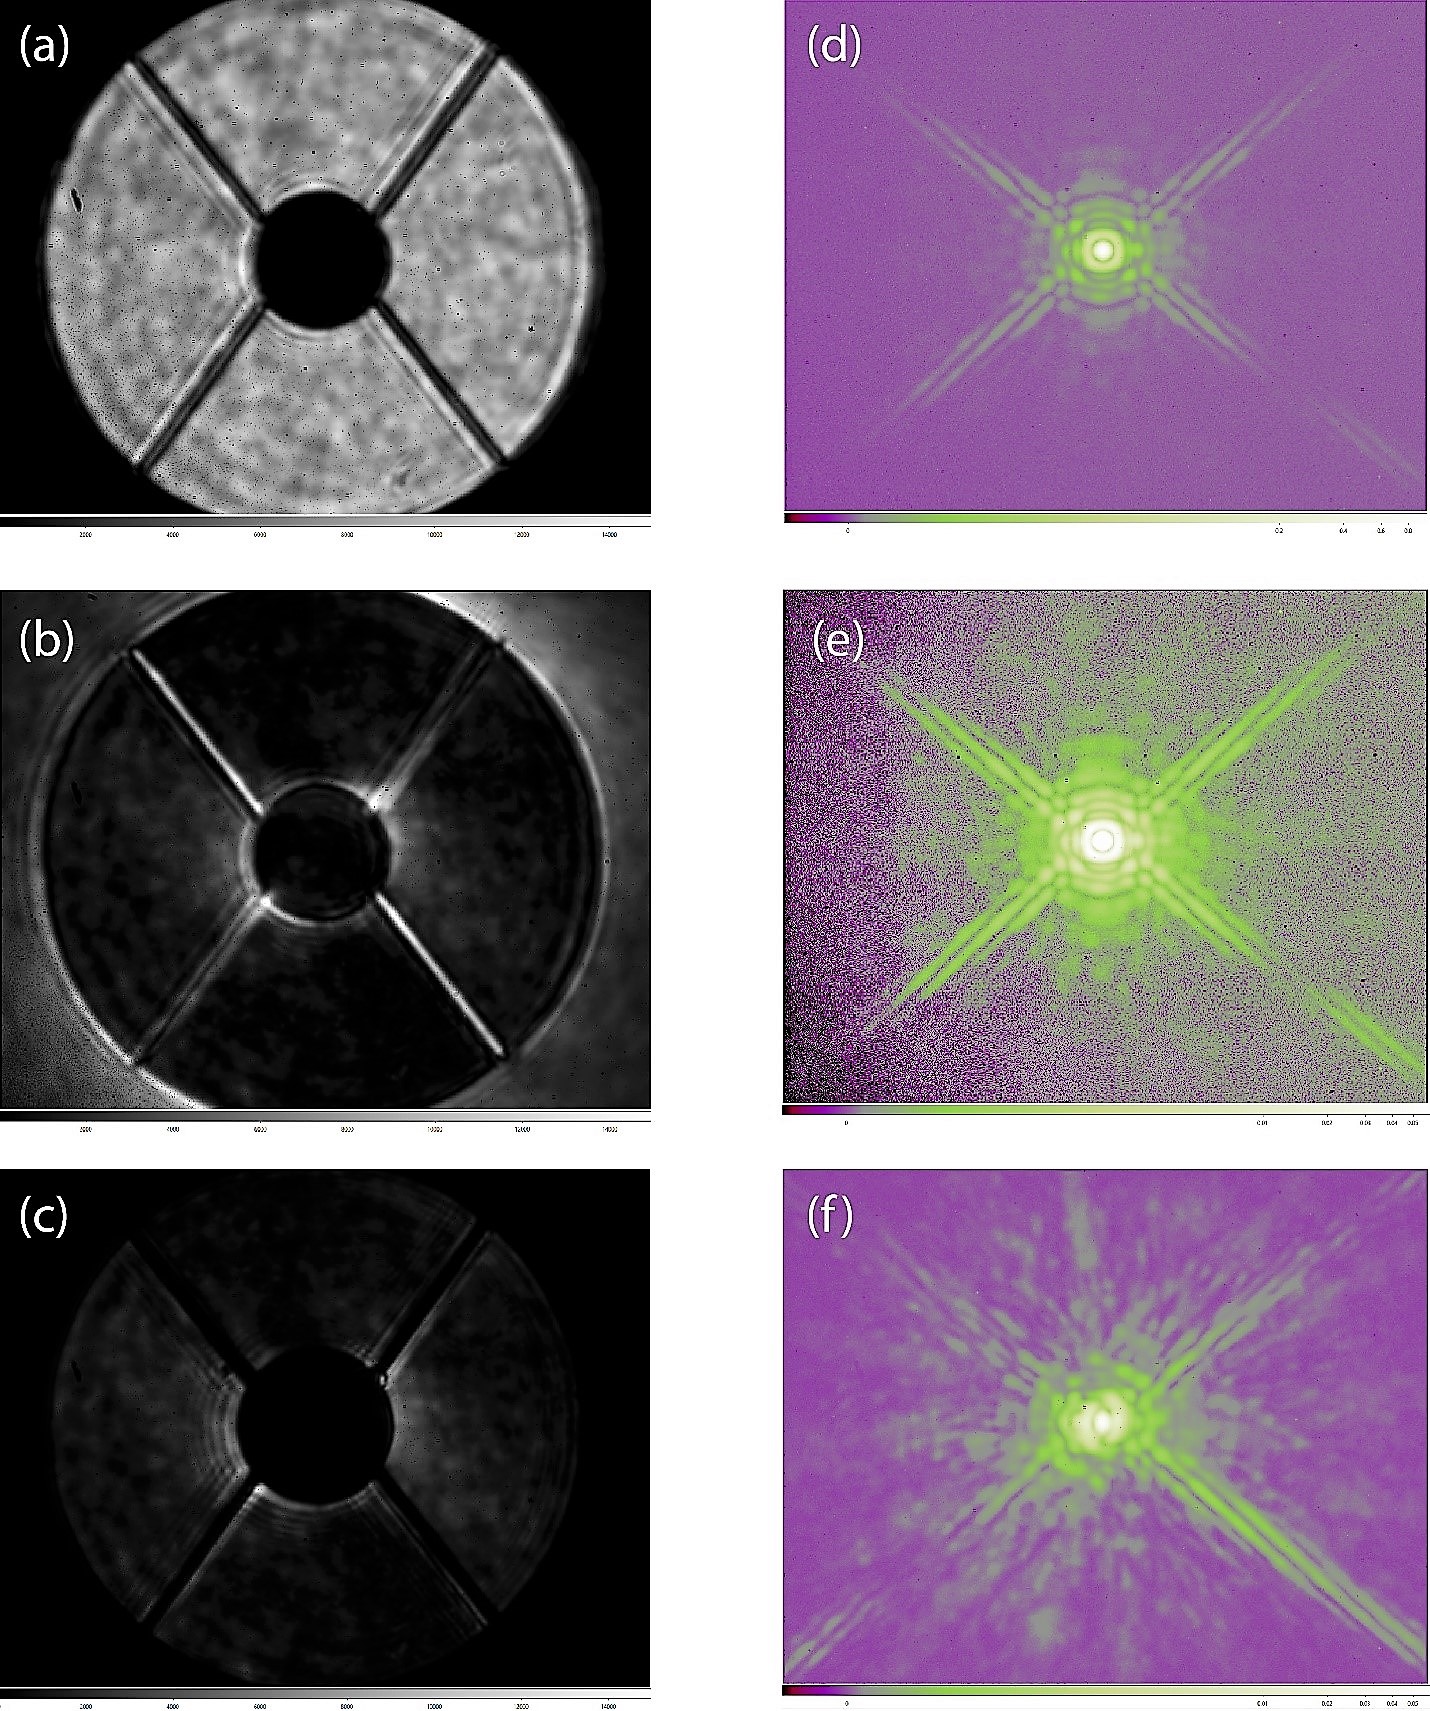 PLACID NIR SLM coronagraphic performance at H-band, as tested on the SWATCHi tesbed of Fig.1 with a F/60 focal ratio and DAG-shaped entrance pupil and Lyot plane masks (LP in double-pass configuration). (Left) Pupil-plane images in the (a) non-coronagraphic (flat phase on SLM), and coronagraphic (vortex charge n=2) cases (b) without and (c) with the Lyot stop in place; (Right) Focal-plane PSF images in the (d,e) coronagraphic and (f) coronagraphic (vortex charge n=2) cases. In (e), the contrast color scale is stretched at the same level as (f), illustrating how the shot-noise (granularity) at larger angular separation in (e) is suppressed in the coronagraphic image (f), i.e. demonstrating how the dynamic range is improved by being able to integrate longer in the coronagraphic observing mode.